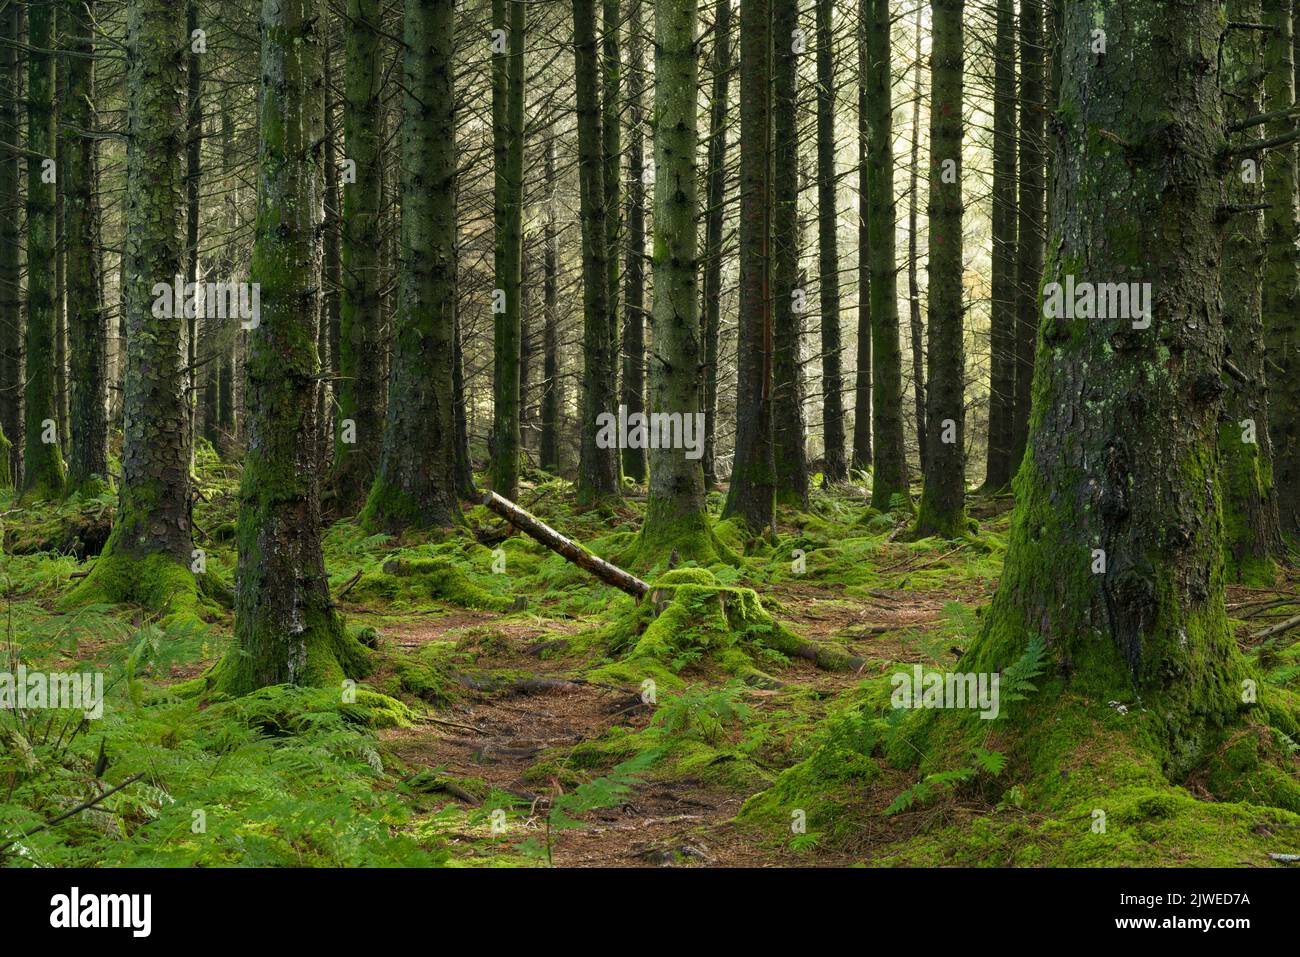 A coniferous plantation at Stockhill Wood in the Mendip Hills AONB, Somerset, England. Stock Photo